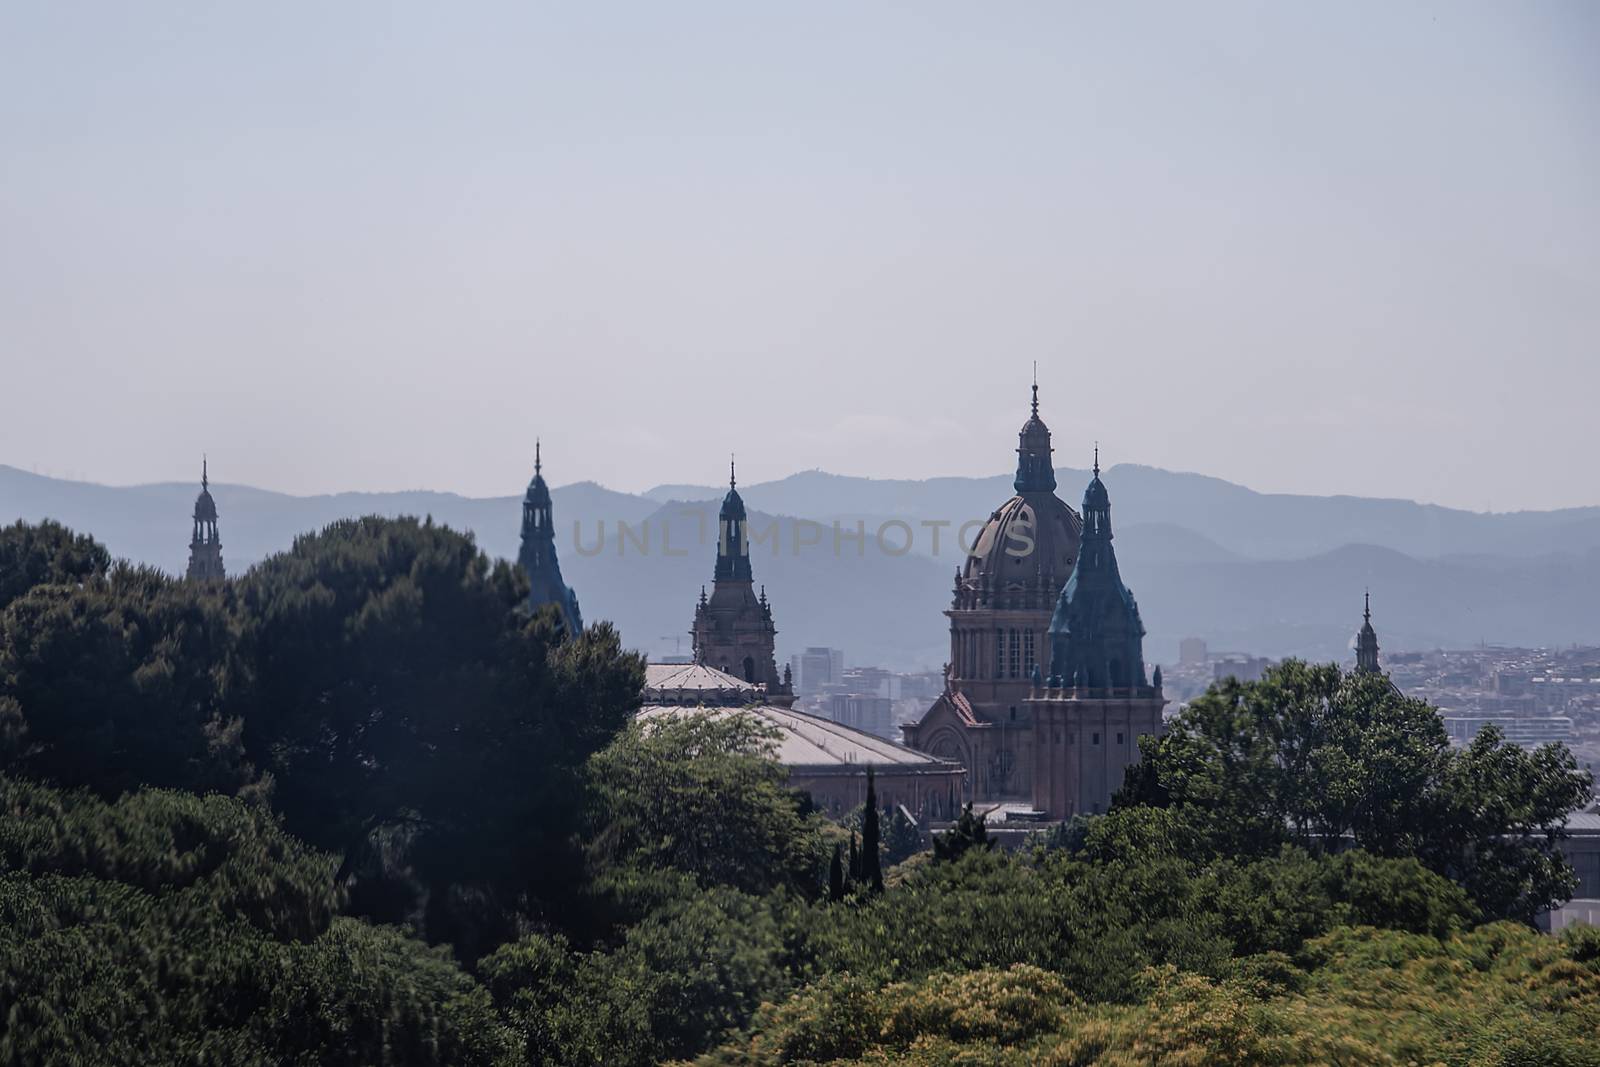 ES, Barcelona - June 2018: Towers ands domes of the National Palace